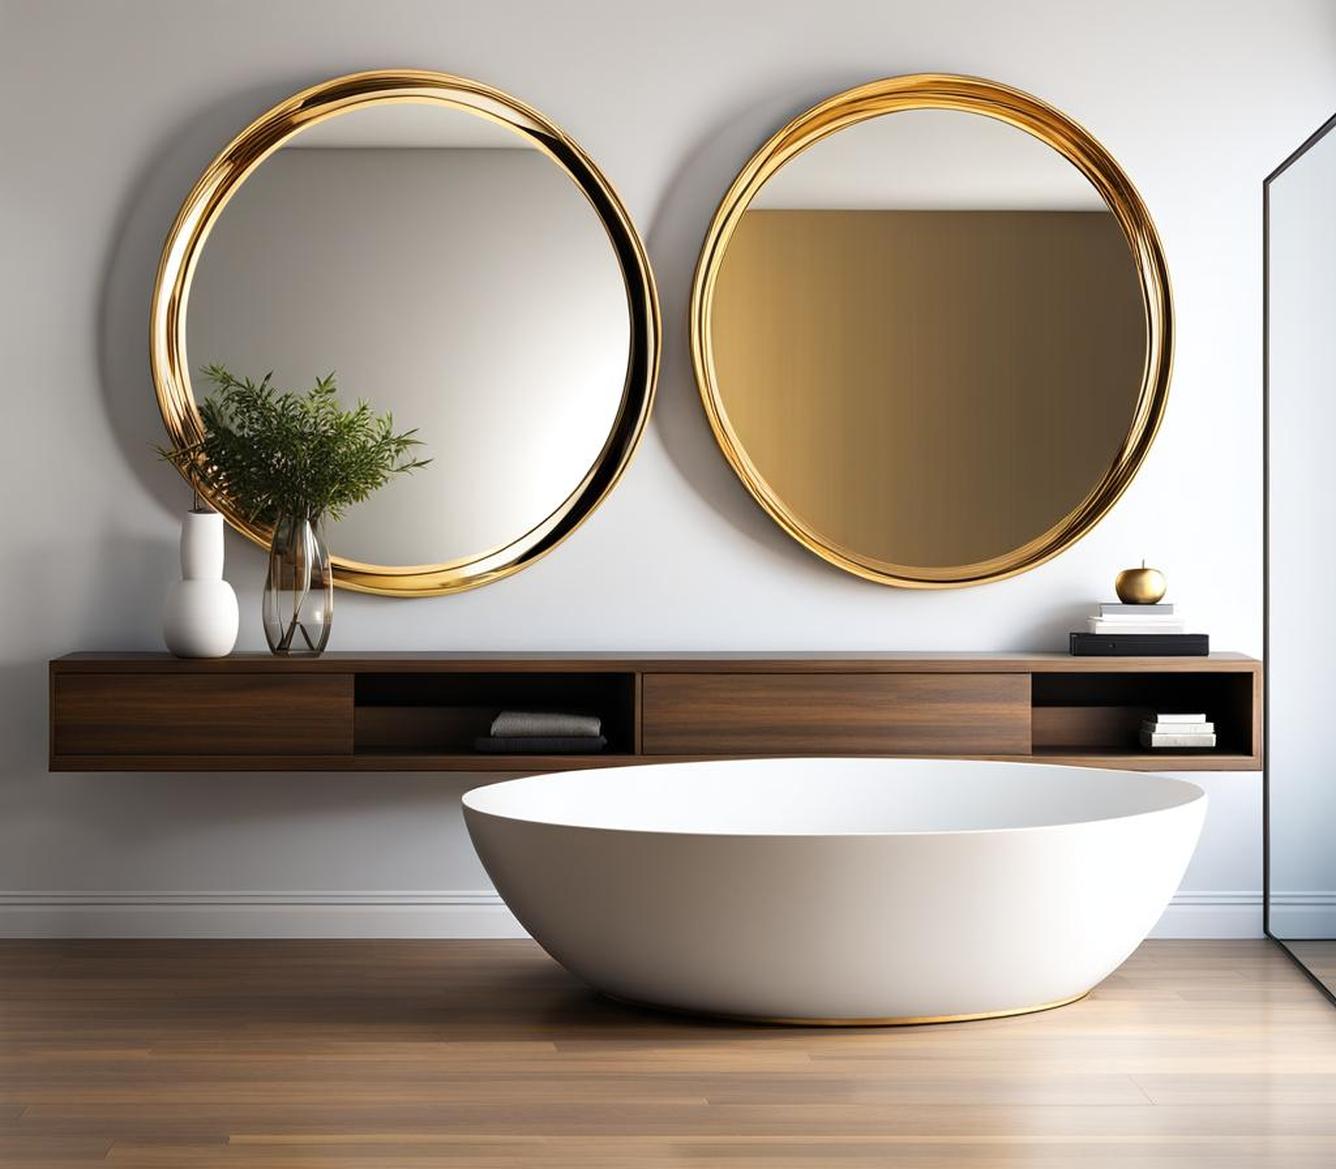 3 round mirrors on wall